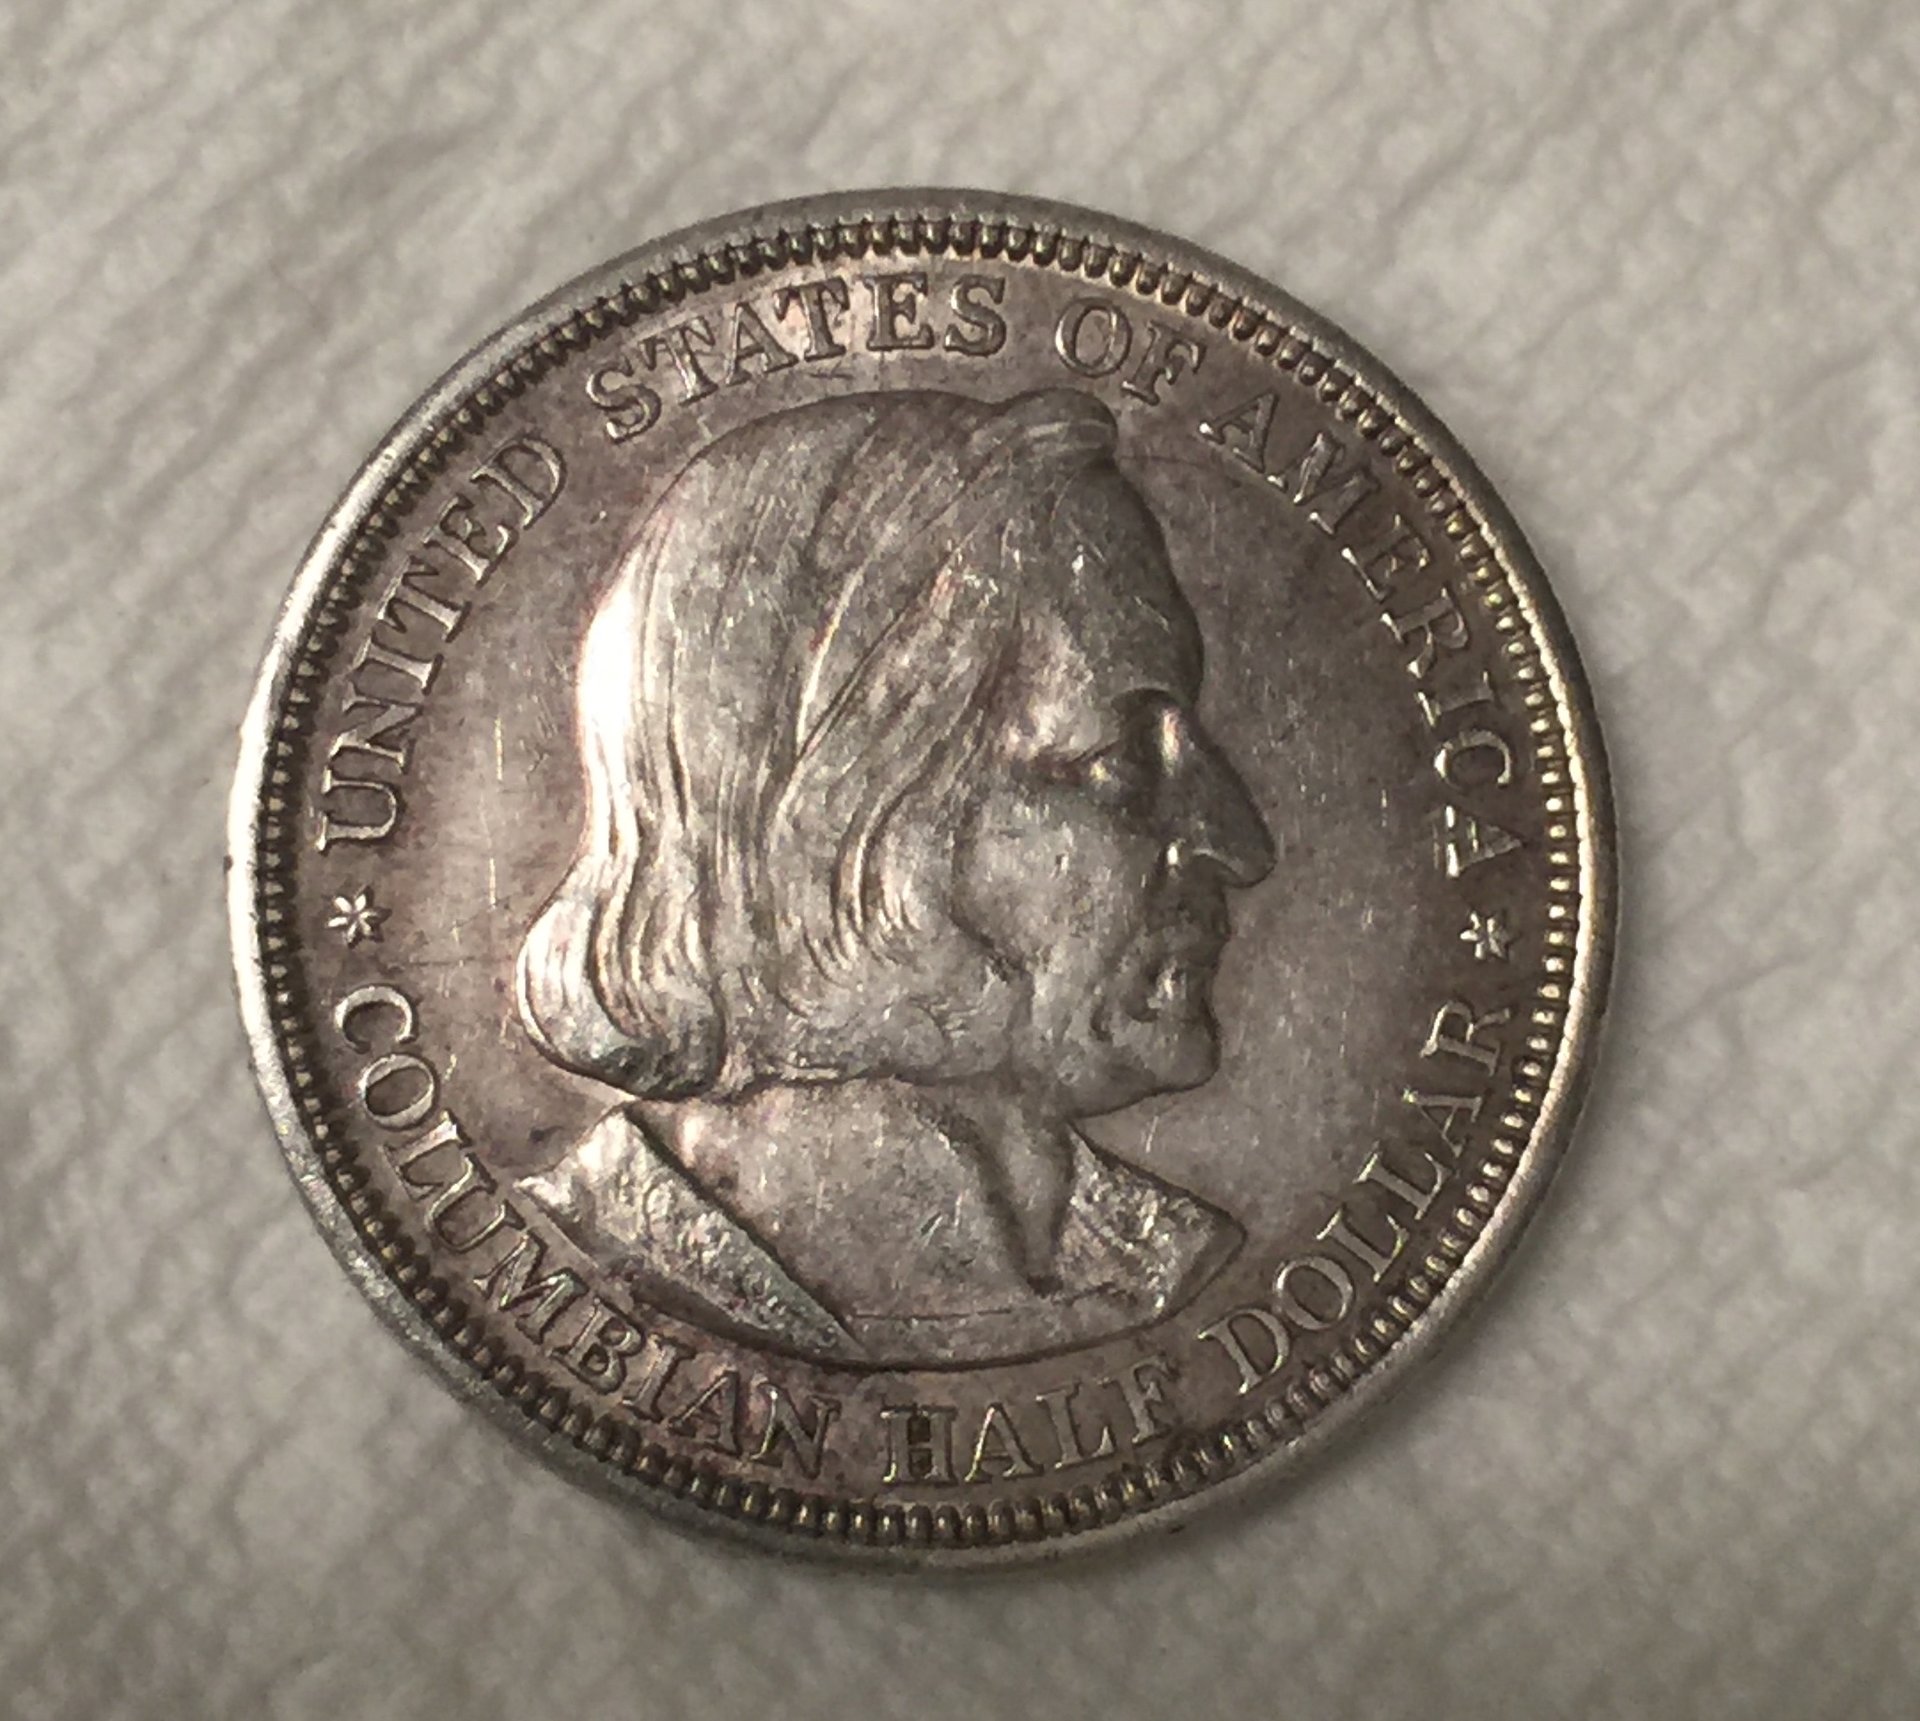 1893 Columbian Half Dollar Is This Worth Something Please Need Help Thanks Coin Talk,When Do Puppies Eyes Open After Birth